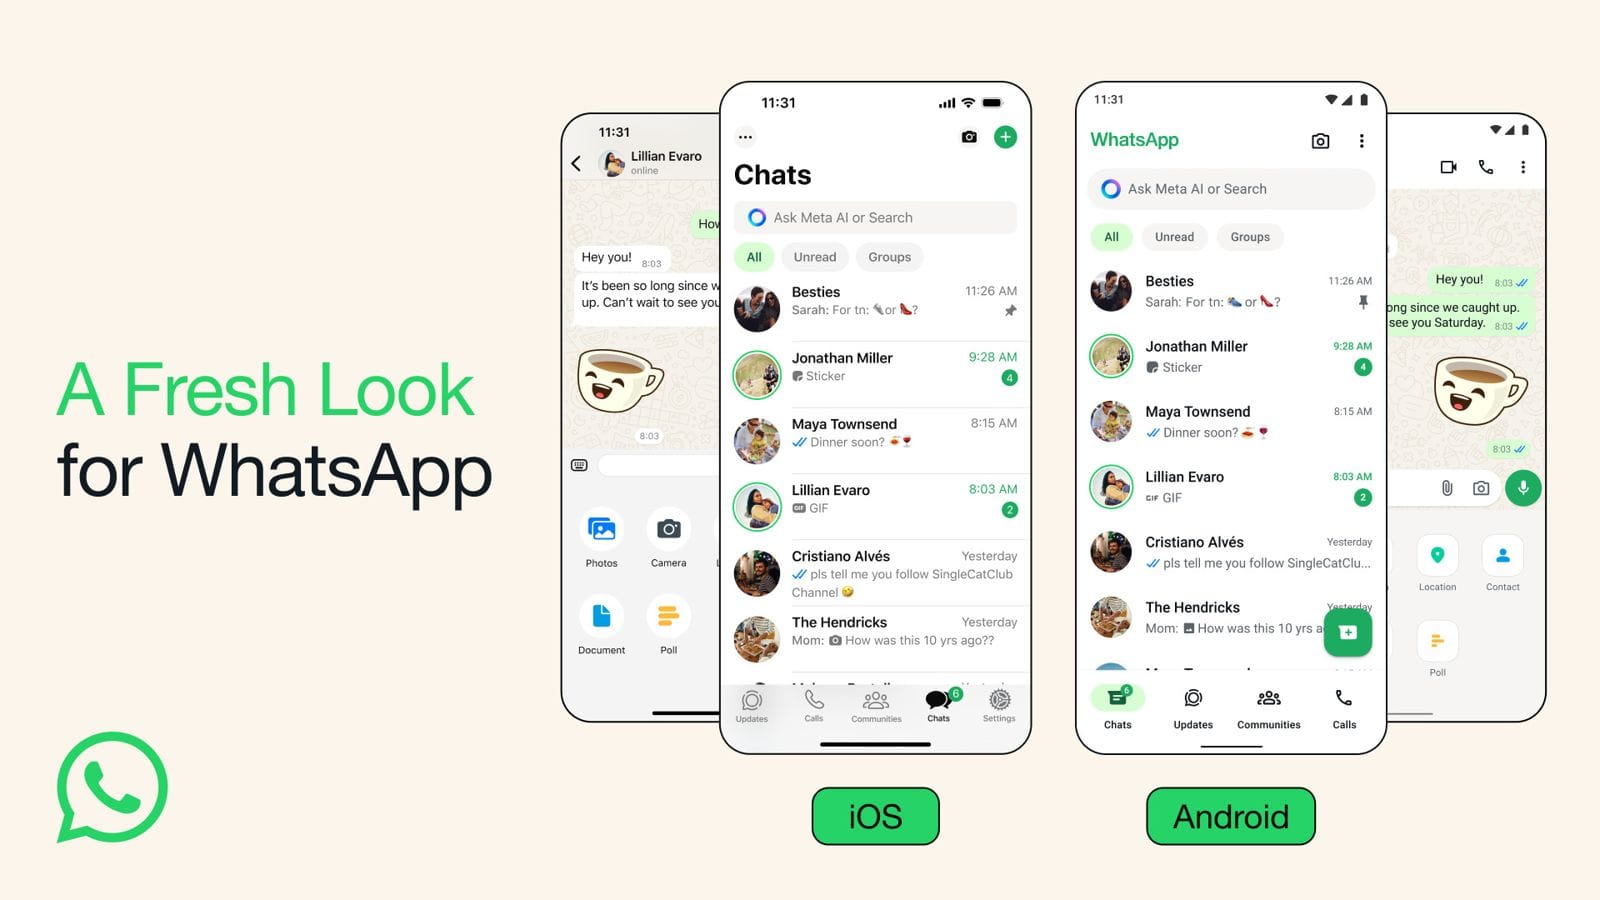 WhatsApp unveils major redesign with new icons, improved dark mode